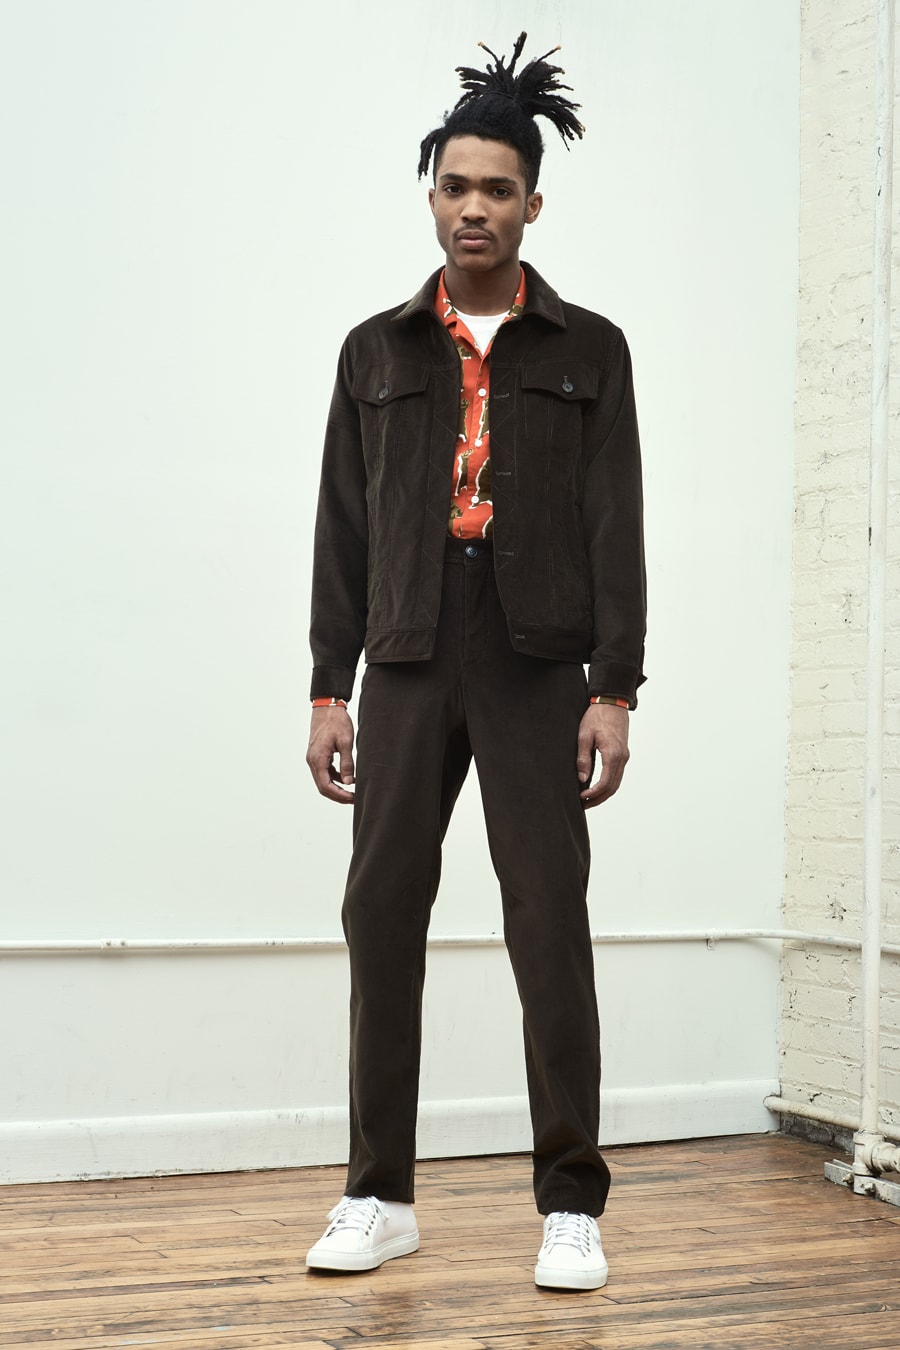 Band of Outsiders 2017 Fall/Winter Lookbook